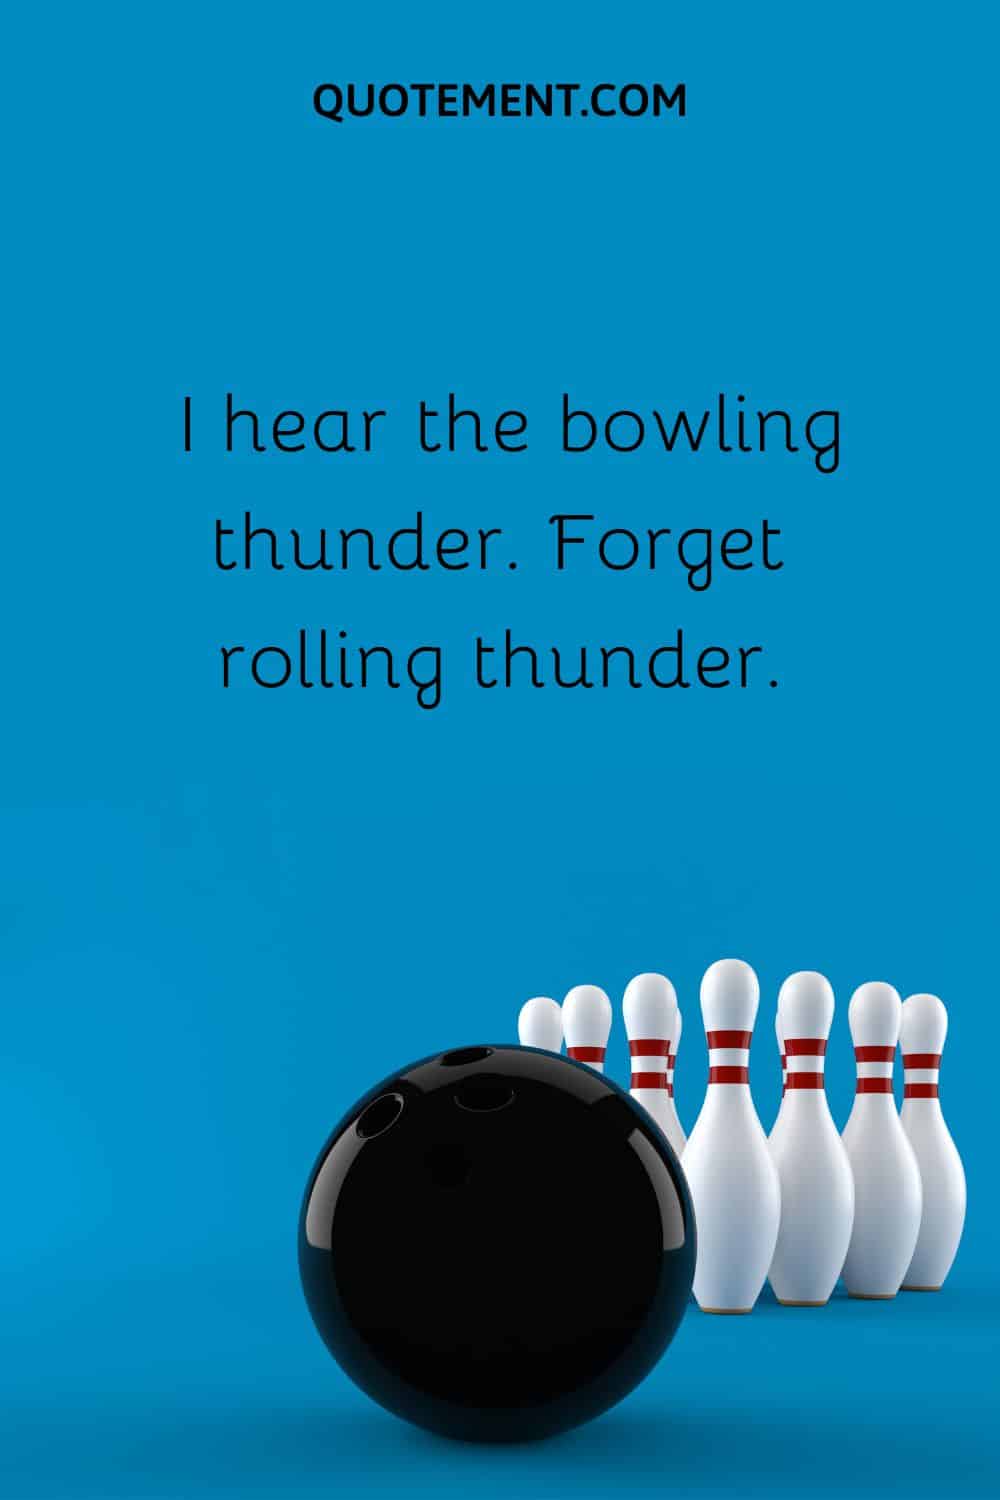 I hear the bowling thunder. Forget rolling thunder